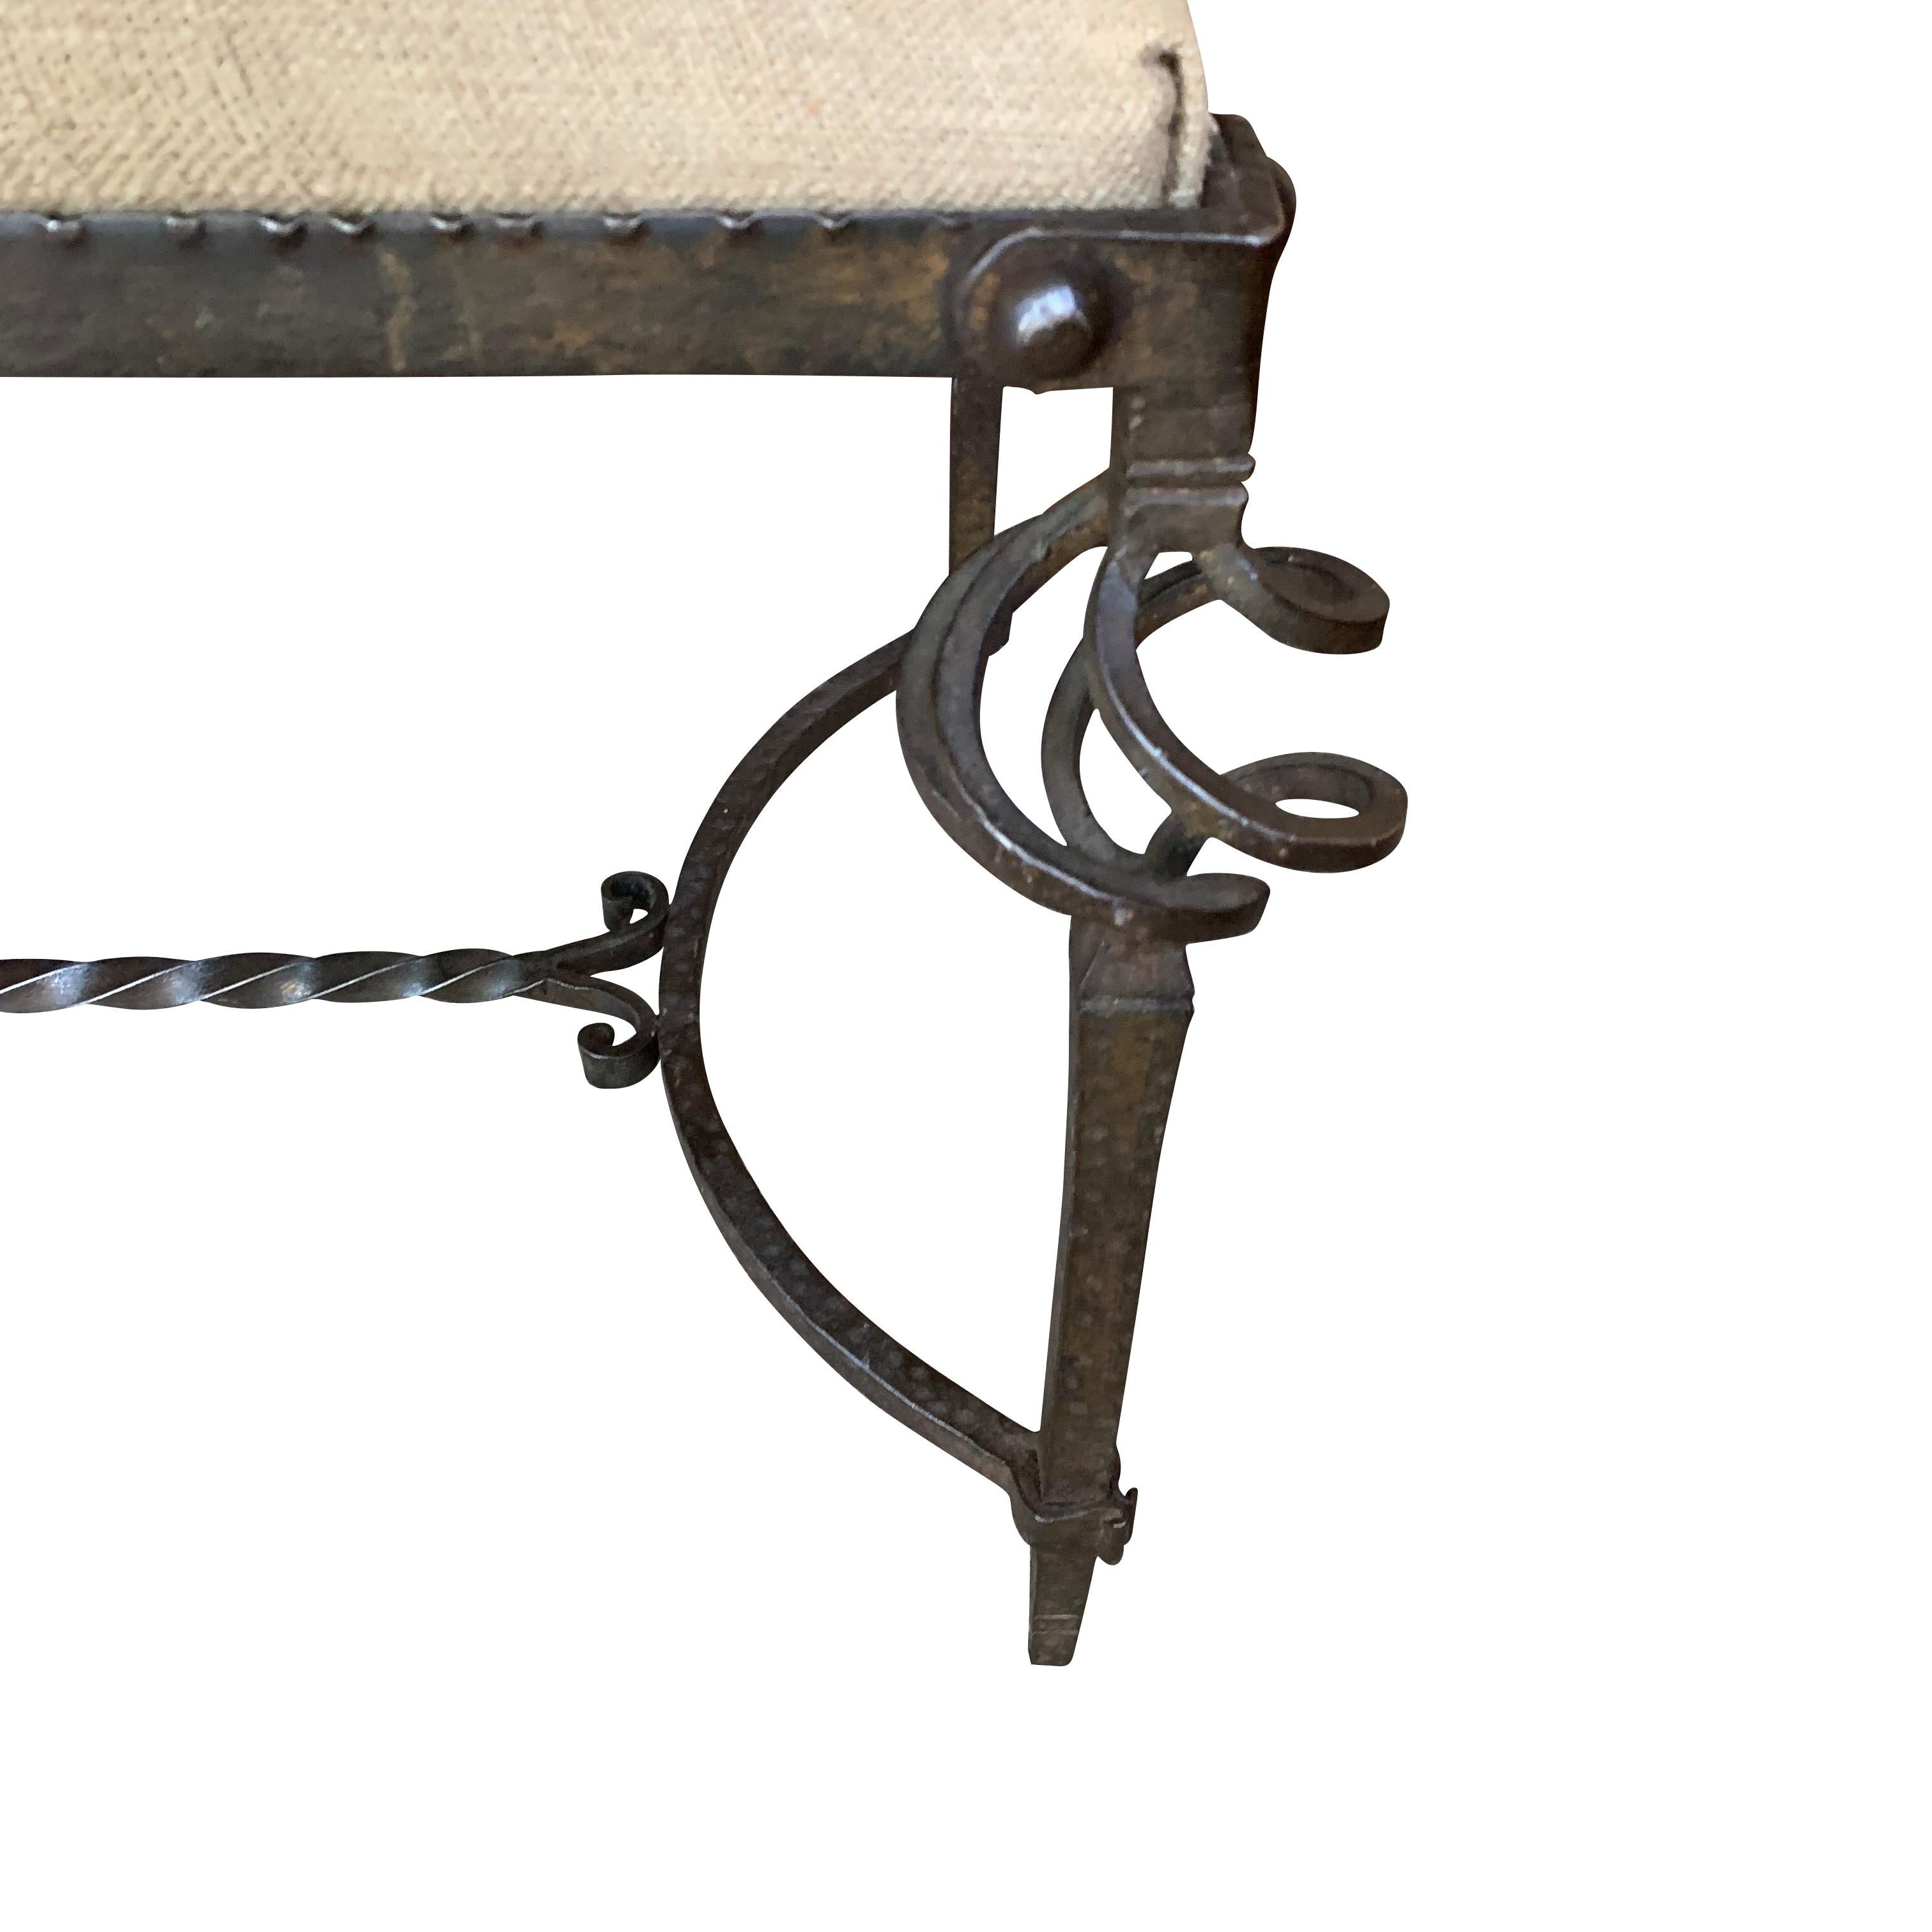 The frame of this 1940s Spanish upholstered bench is metal having a spiral decorative design on each leg. The stretcher is also spiraled with a decorative design at each end.
The bench has been newly reupholstered in hand spun Belgian vintage